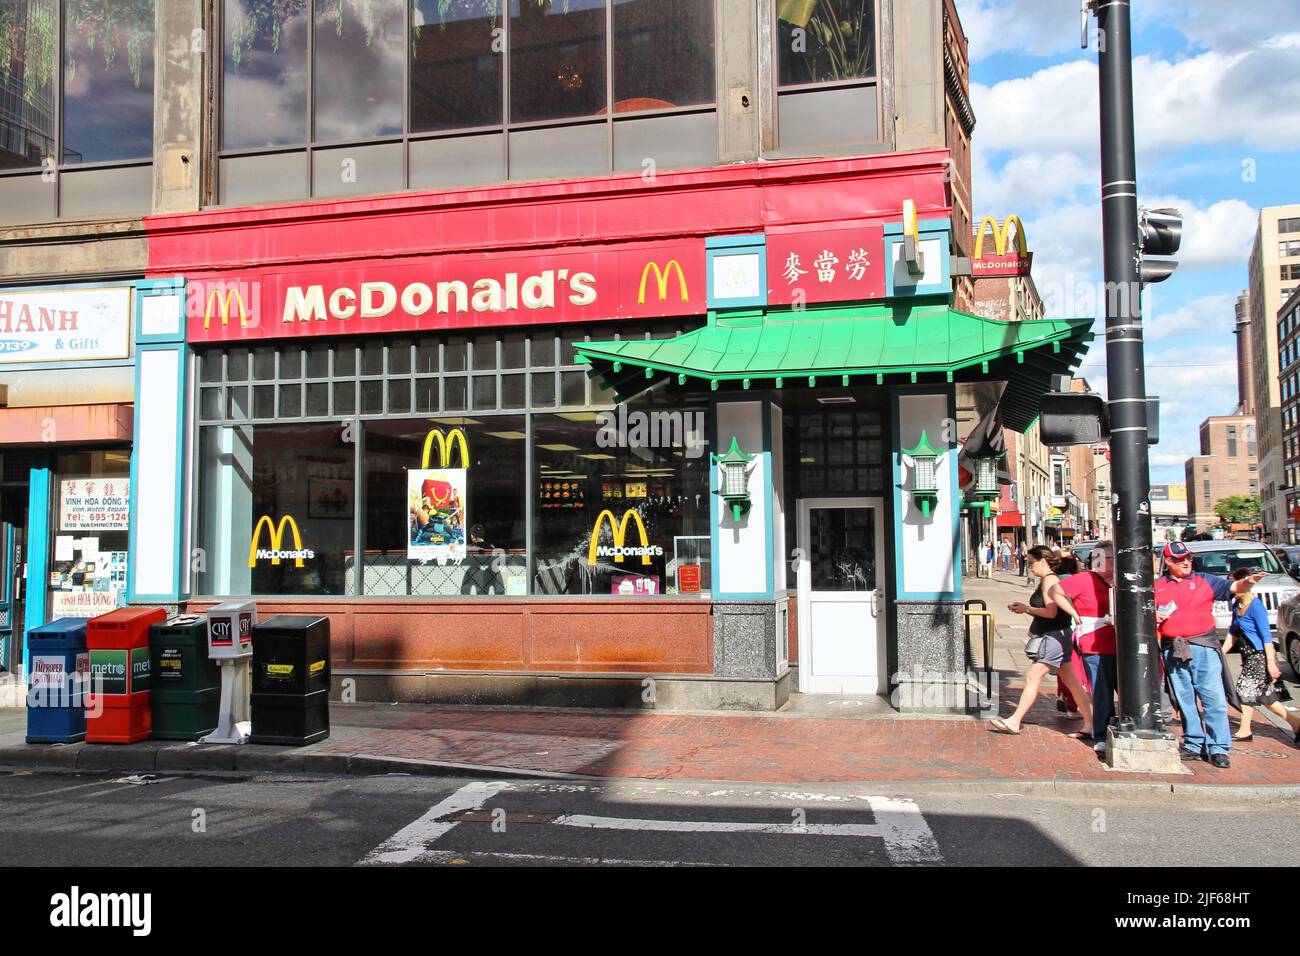 BOSTON, USA - JUNE 8, 2013: People visit McDonald's restaurant in Chinatown in Boston. Boston's Chinatown is the only surviving Chinatown district in Stock Photo